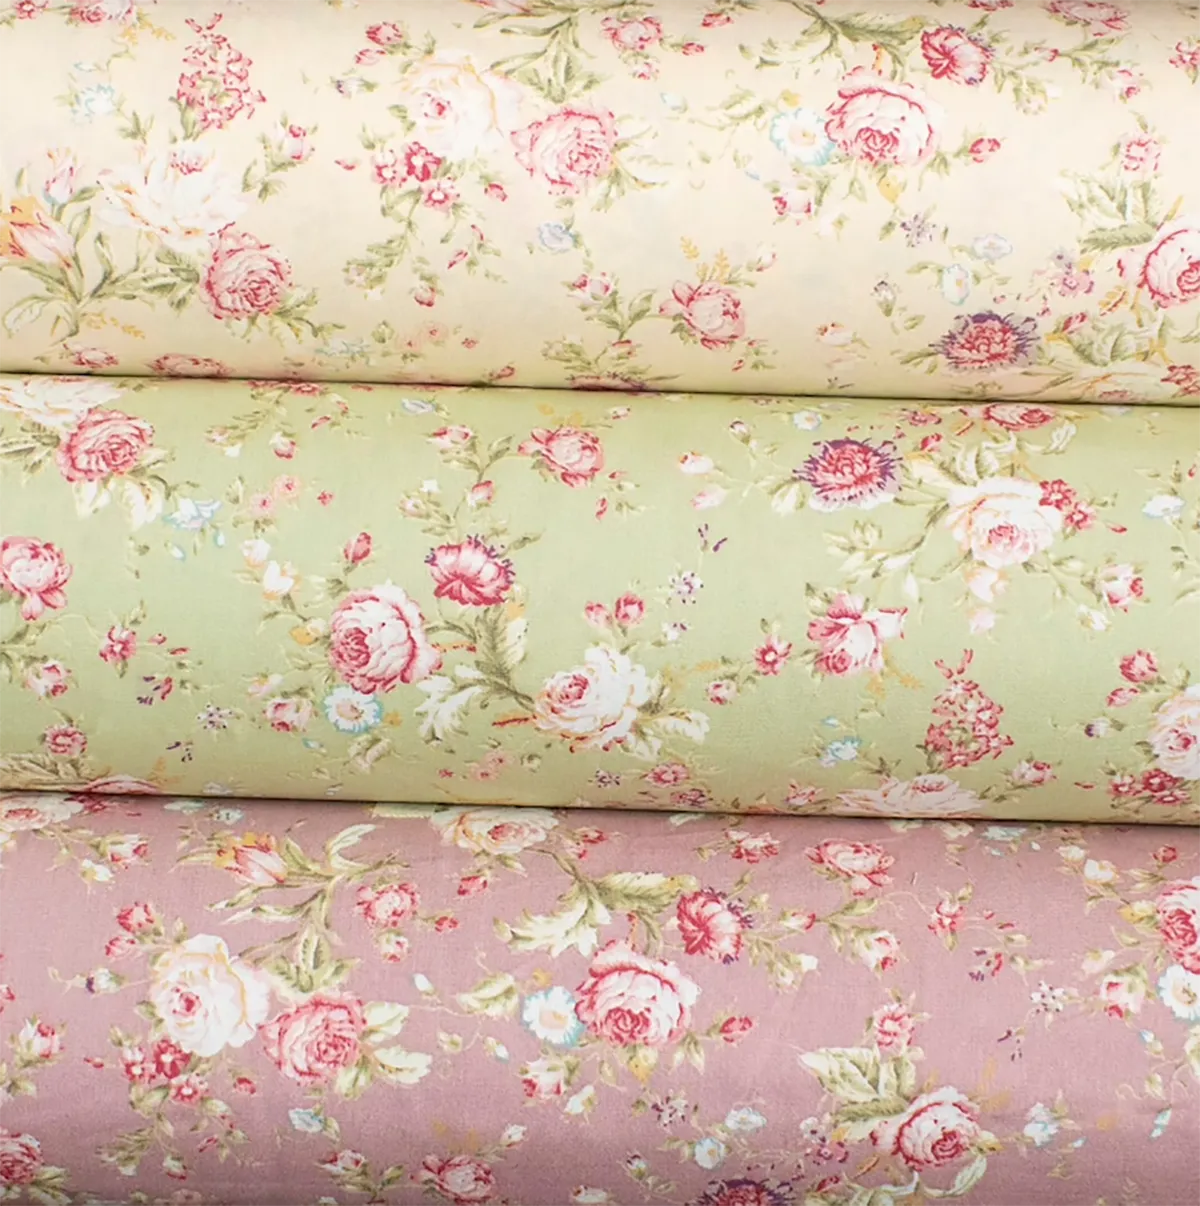 Vintage Rose Floral quilting fabric